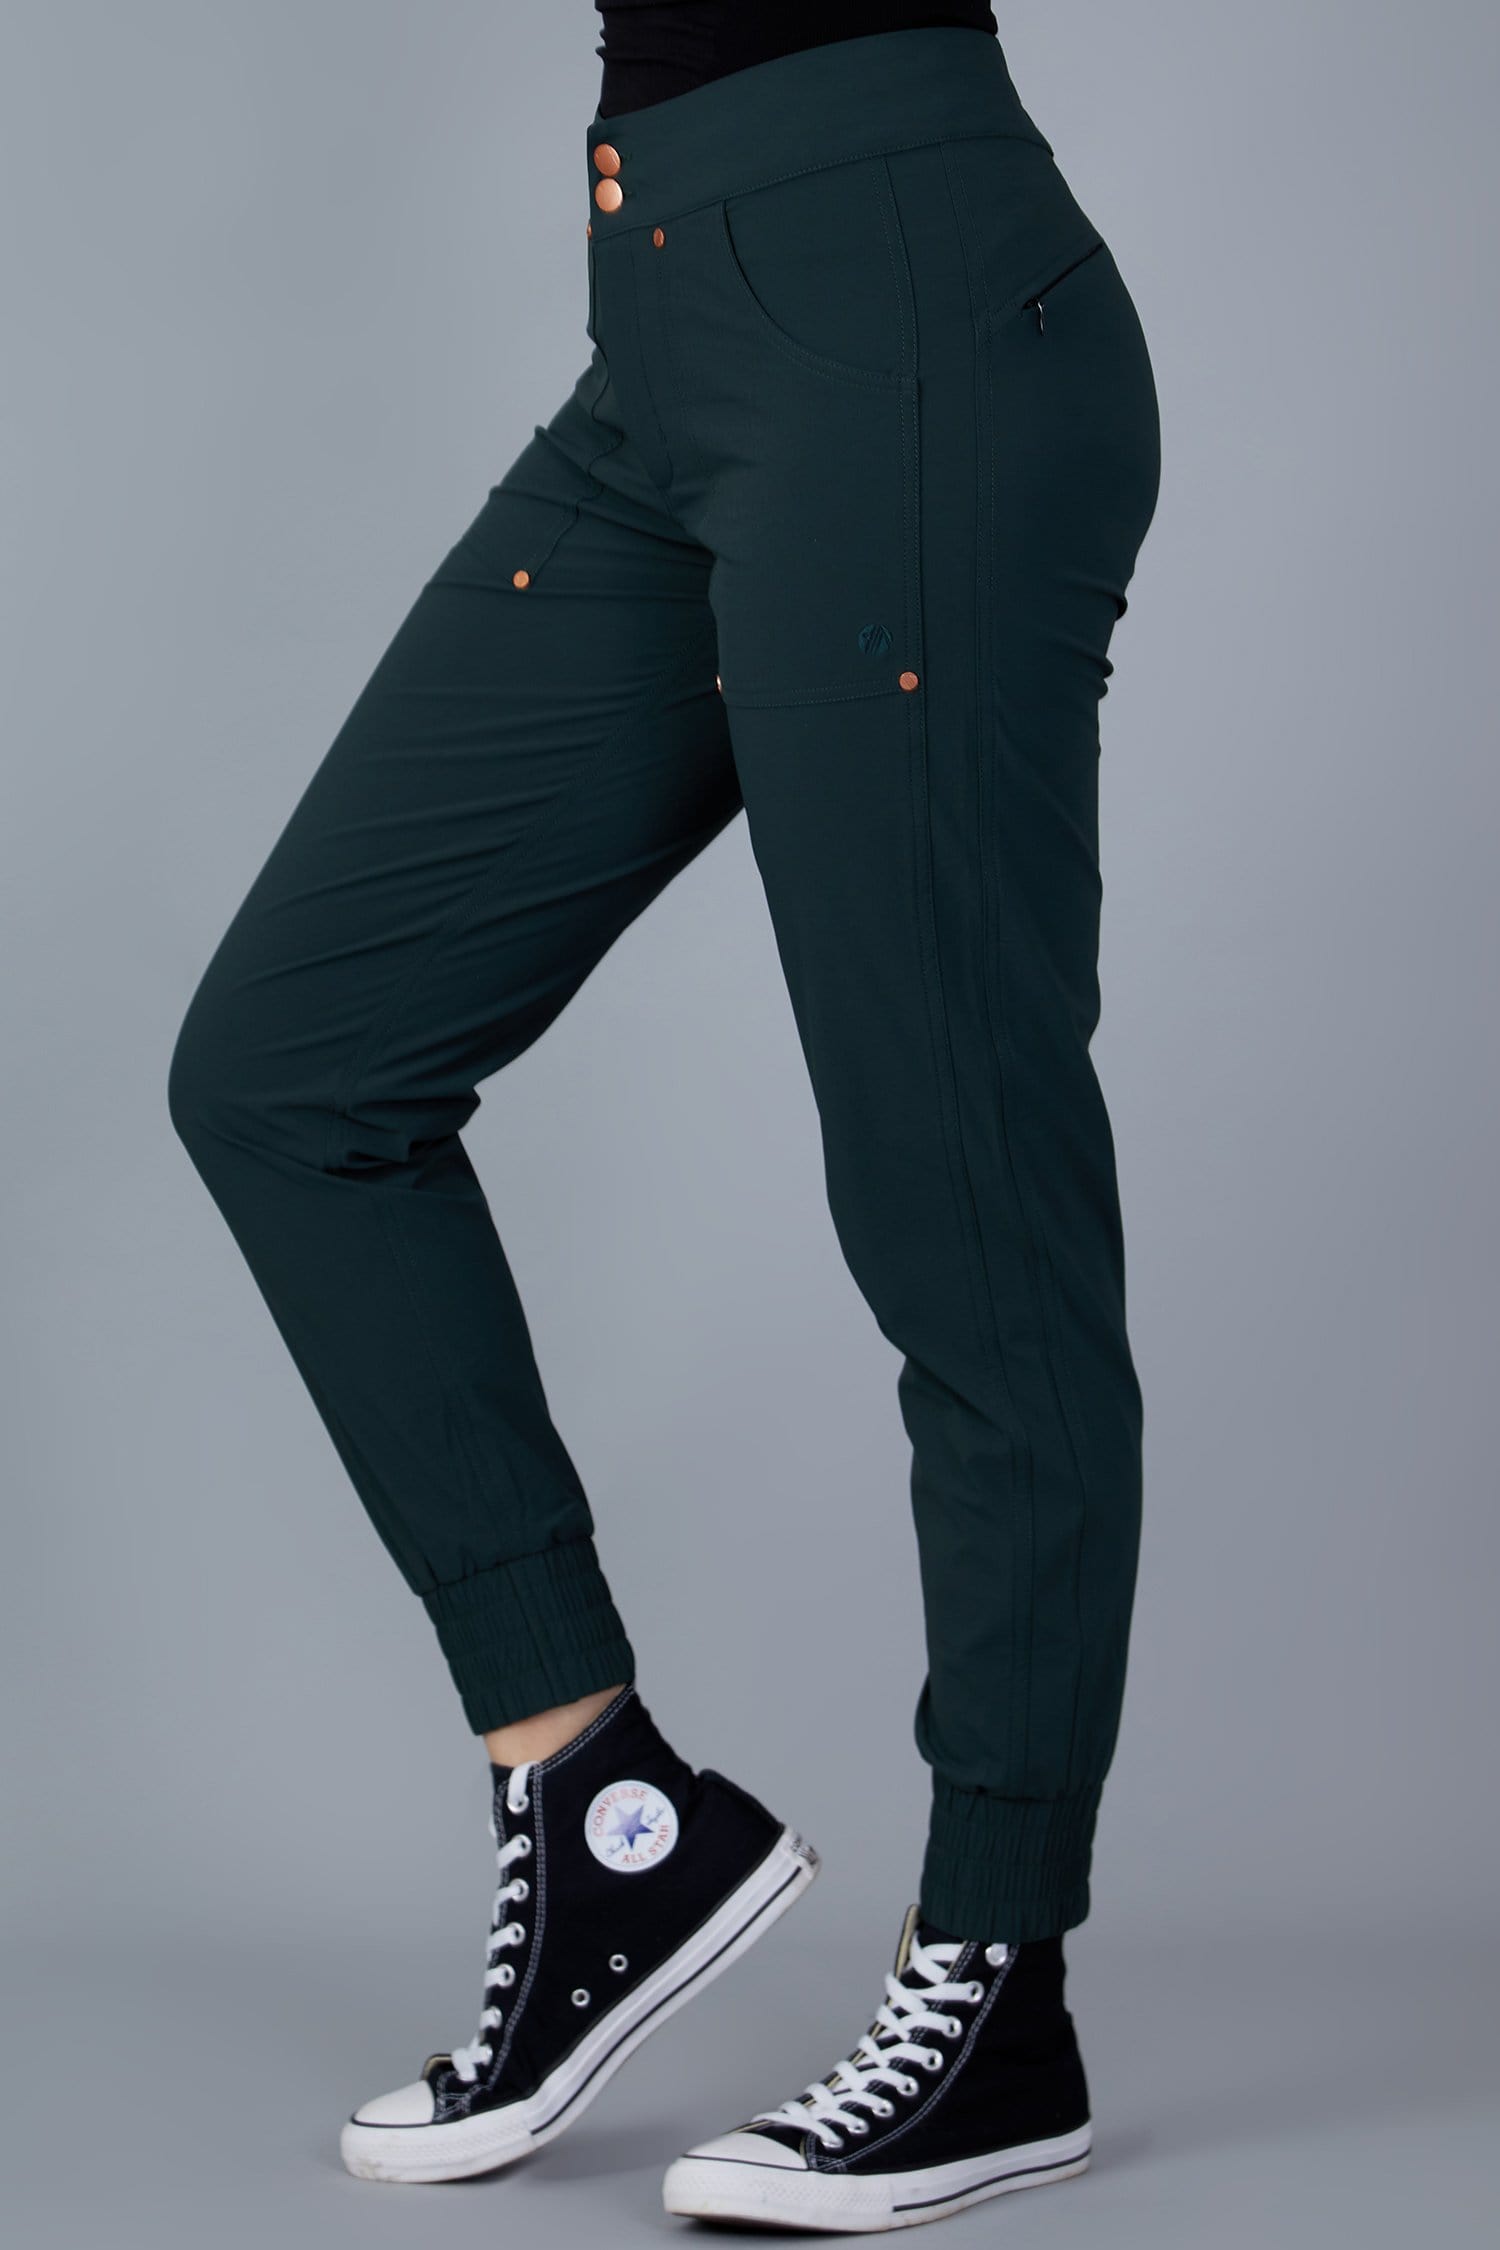 Casual Stroll Pants - Forest Green - 30l / Uk12 - Womens - Acai Outdoorwear